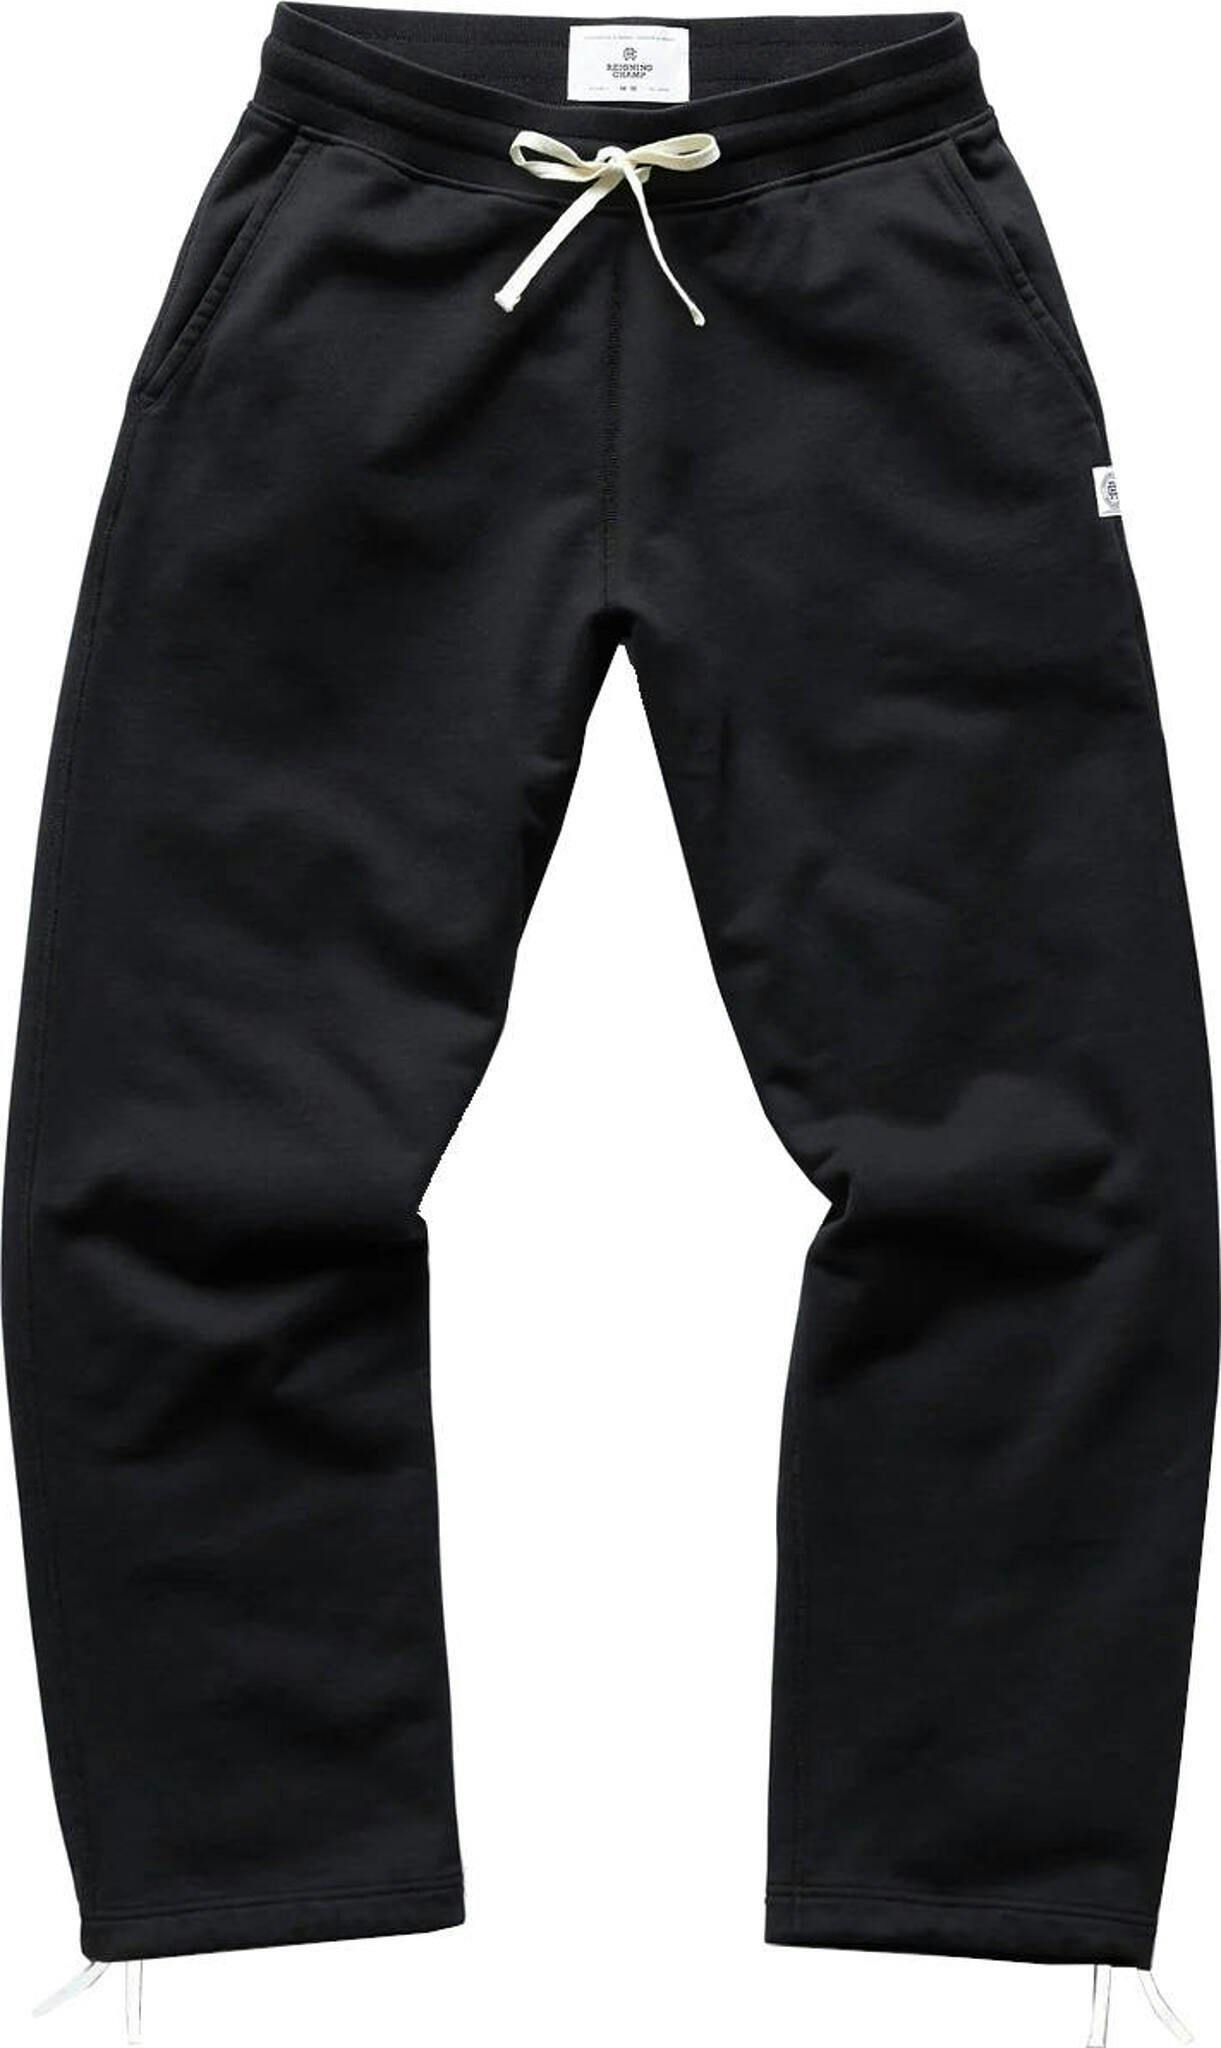 Product image for Midweight Terry Relaxed Sweatpant - Men's